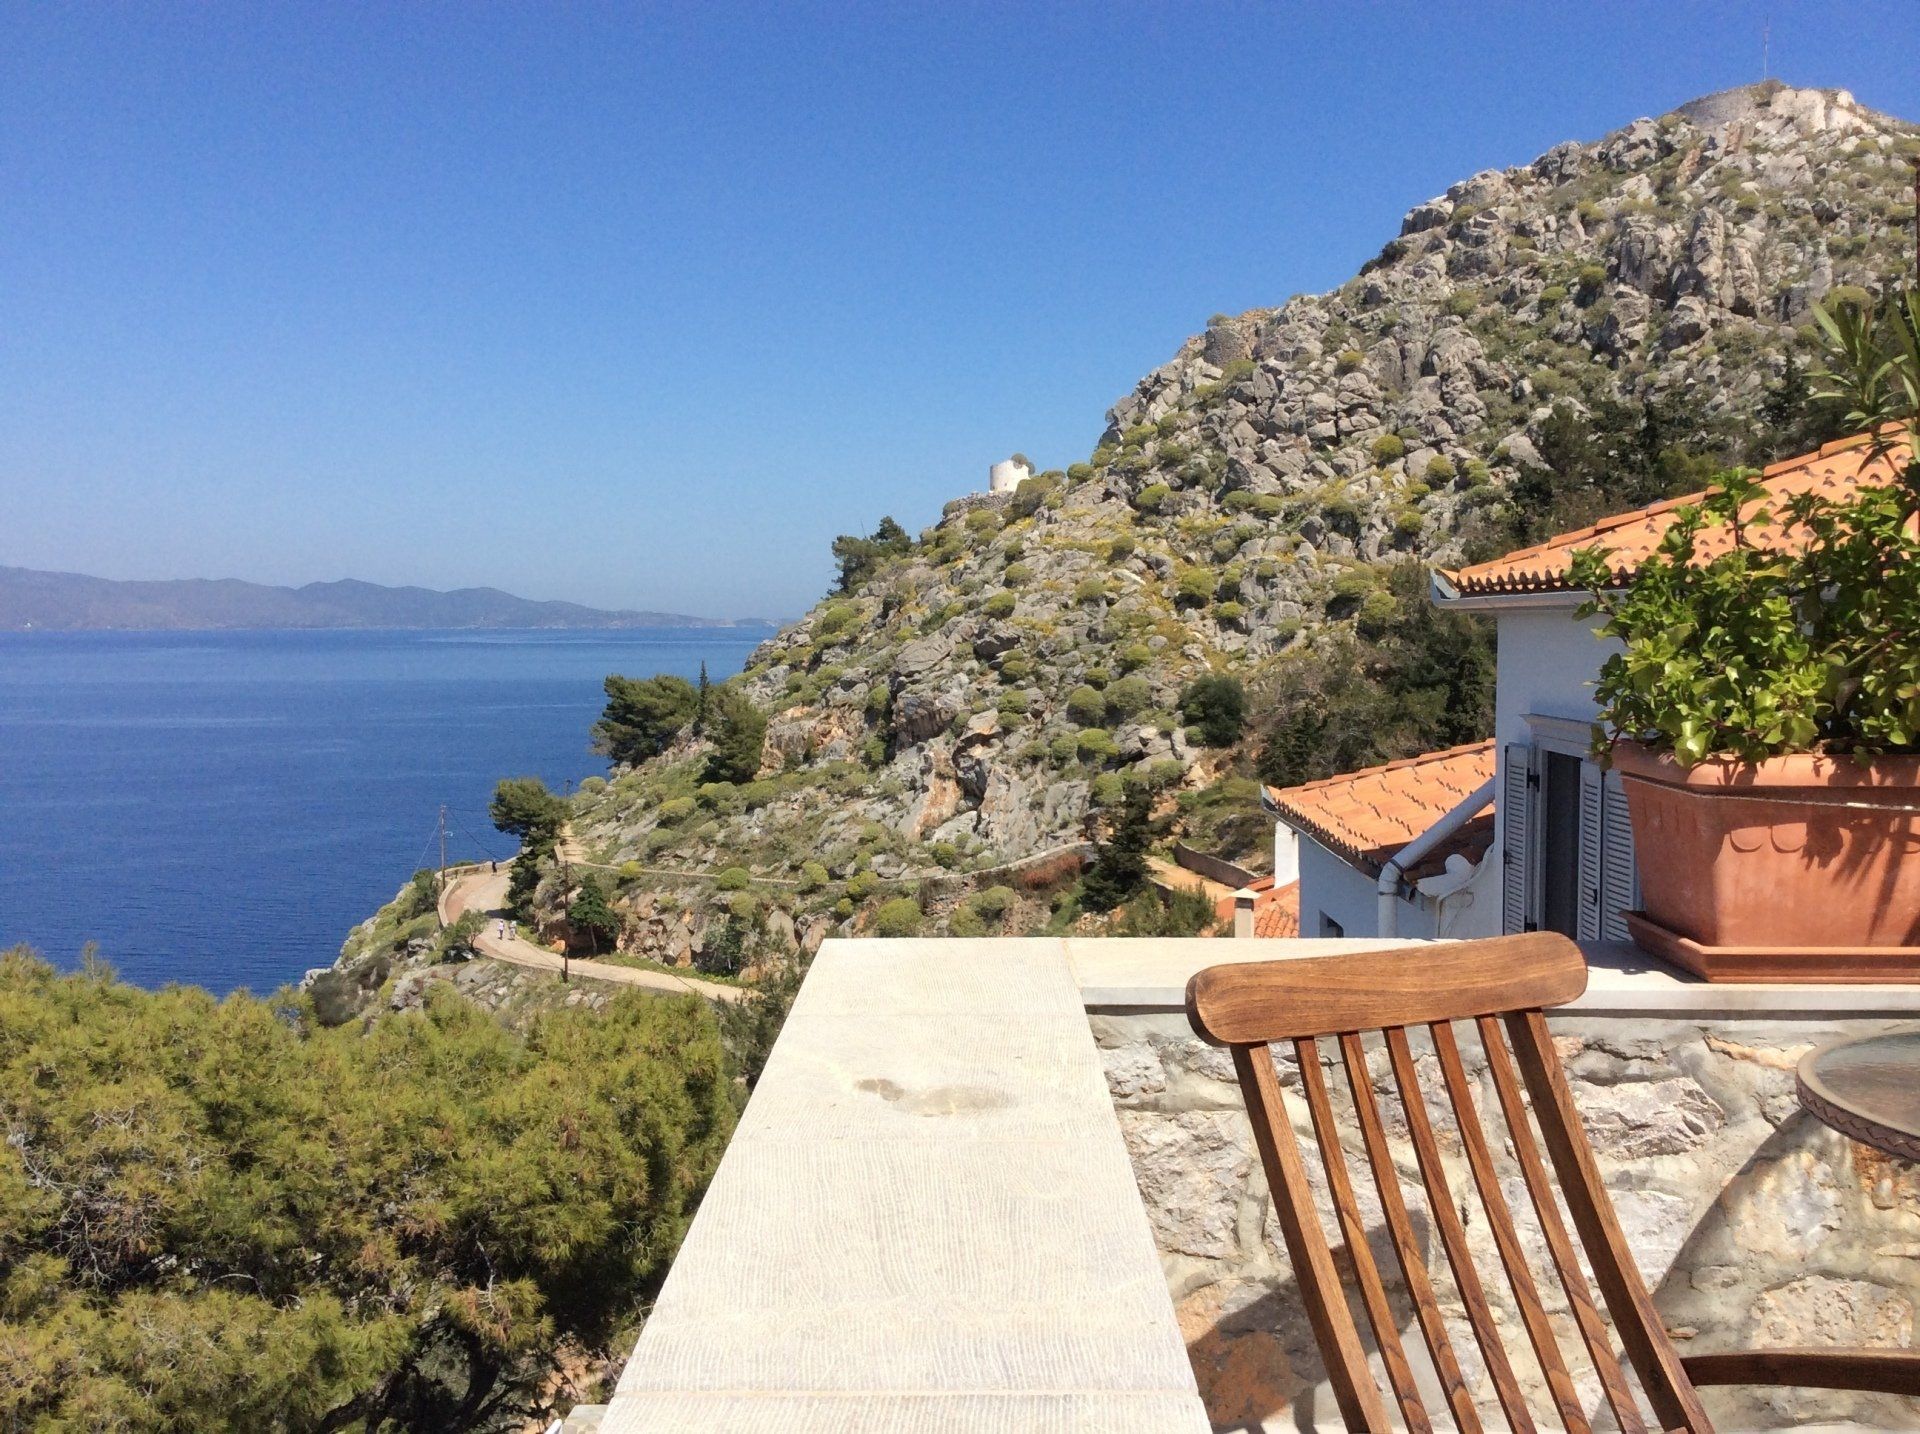 Avlaki Haven House - Private Holiday Houses on Hydra - Accommodation on Hydra Island Greece.